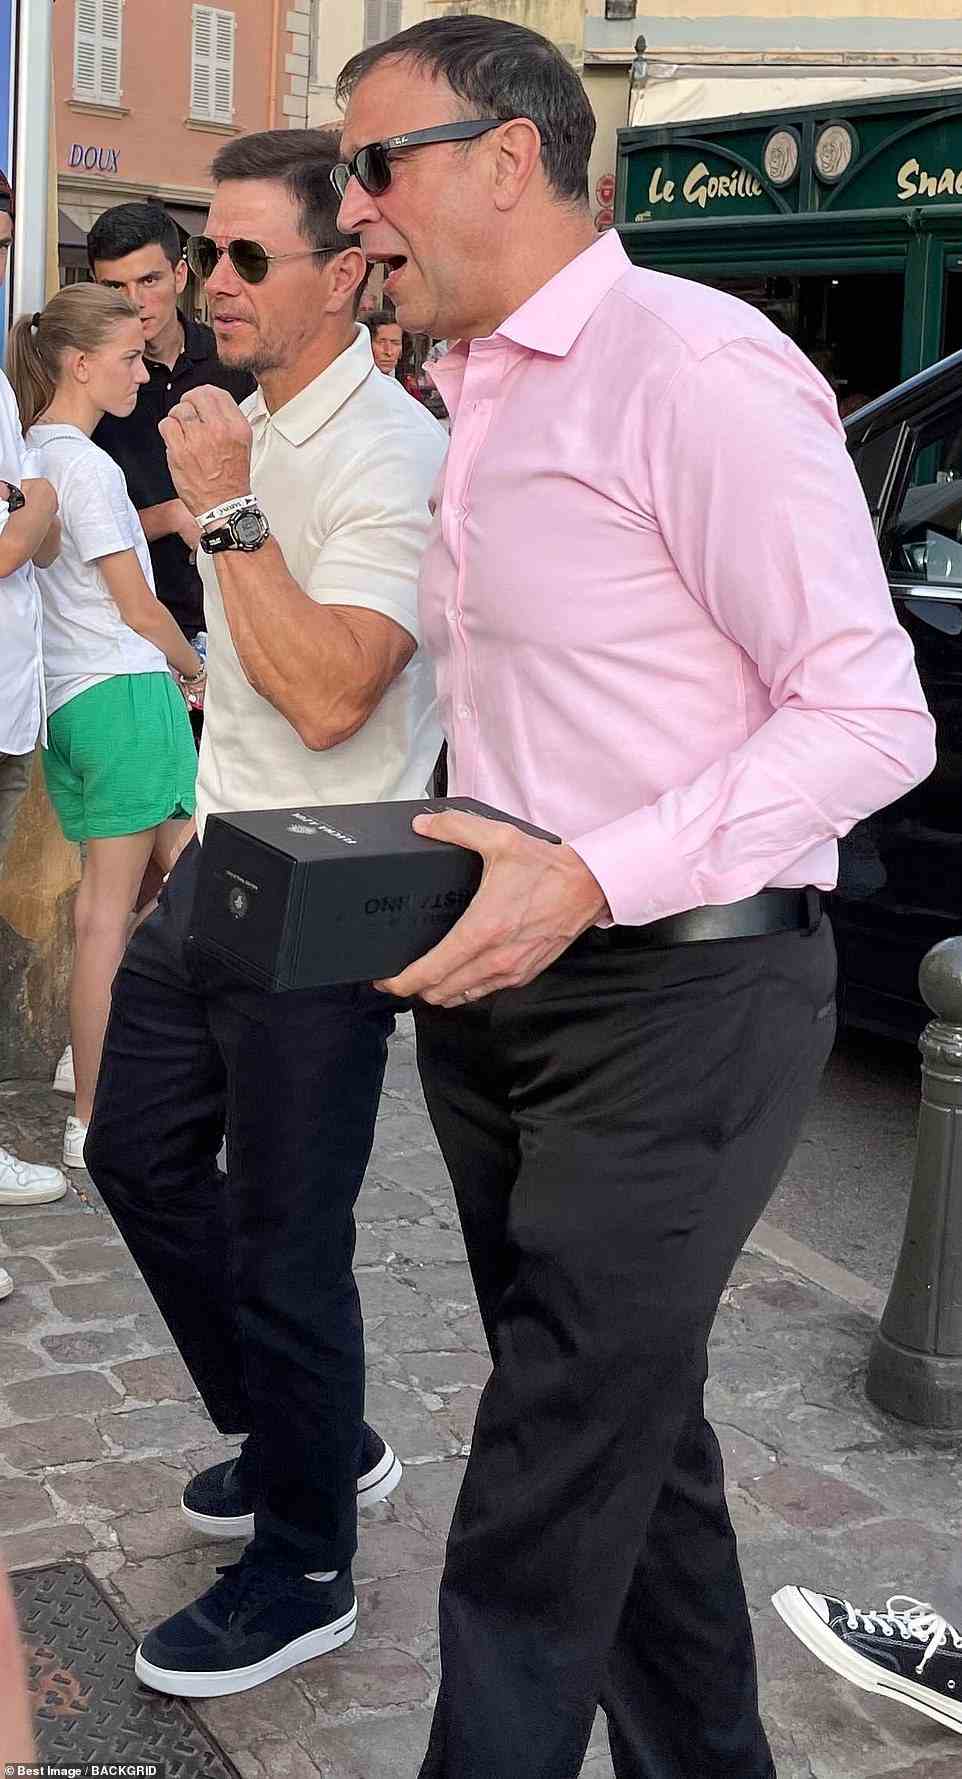 Wahlberg and Emanuel's relationship was showcased in the HBO show Entourage, which follows the career of actor Vincent Chase - played by Adrian Grenier - who is loosely based off of Wahlberg. Wahlberg is seen arriving in St. Tropez